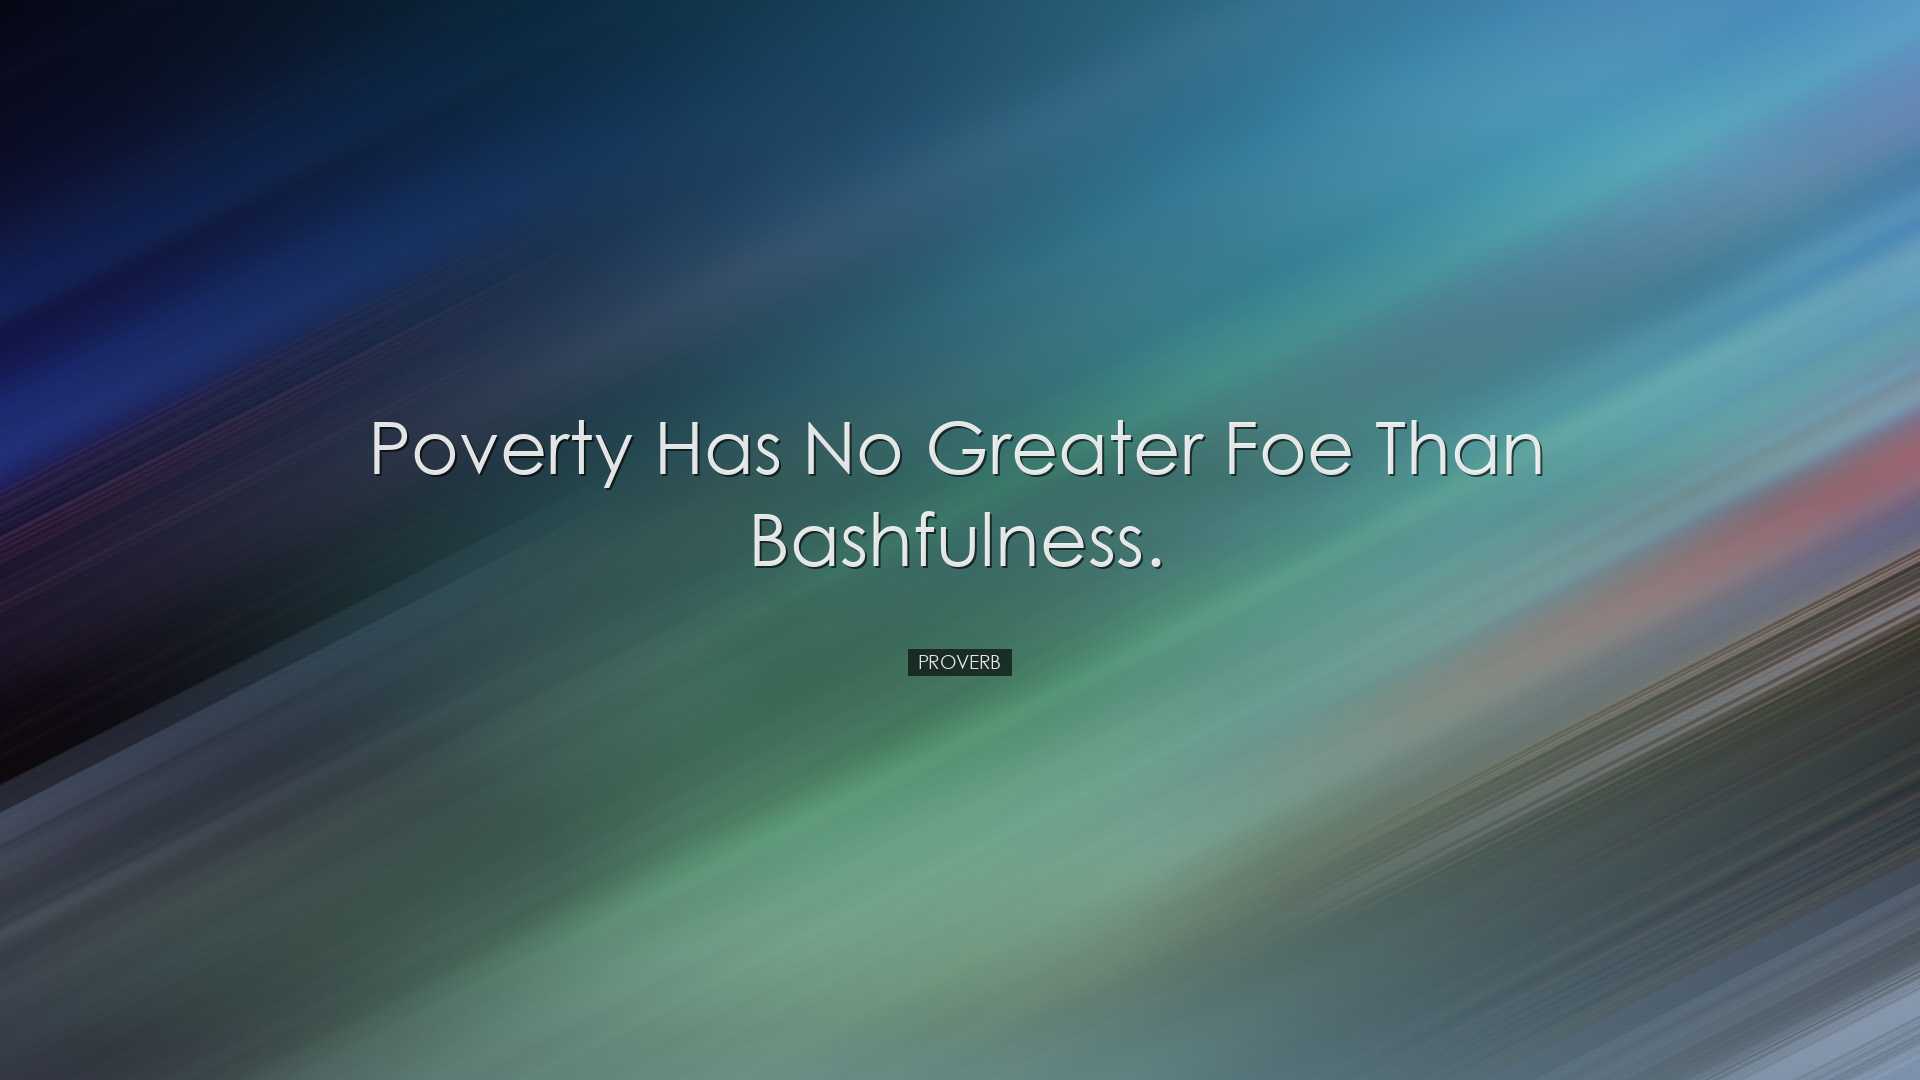 Poverty has no greater foe than bashfulness. - Proverb